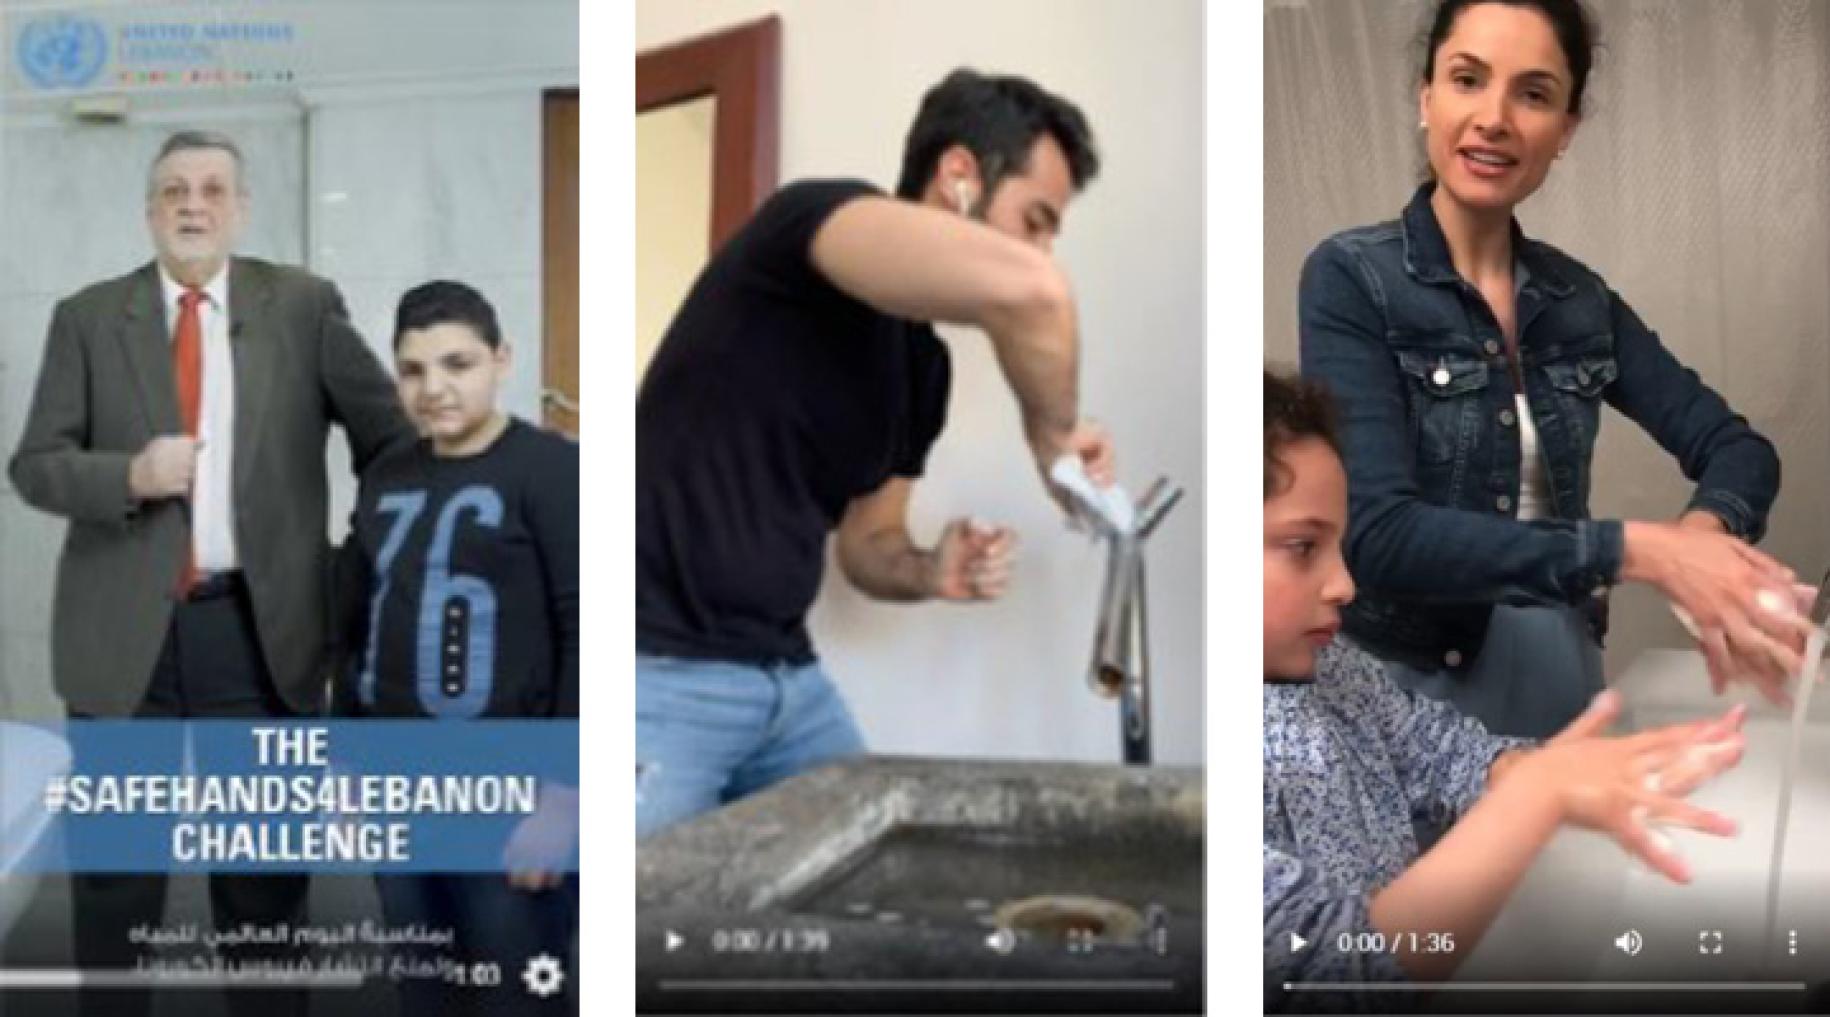 Screen grabs of three videos showing influencers and UN staff participating in the #SafeHands4Lebanon challenge